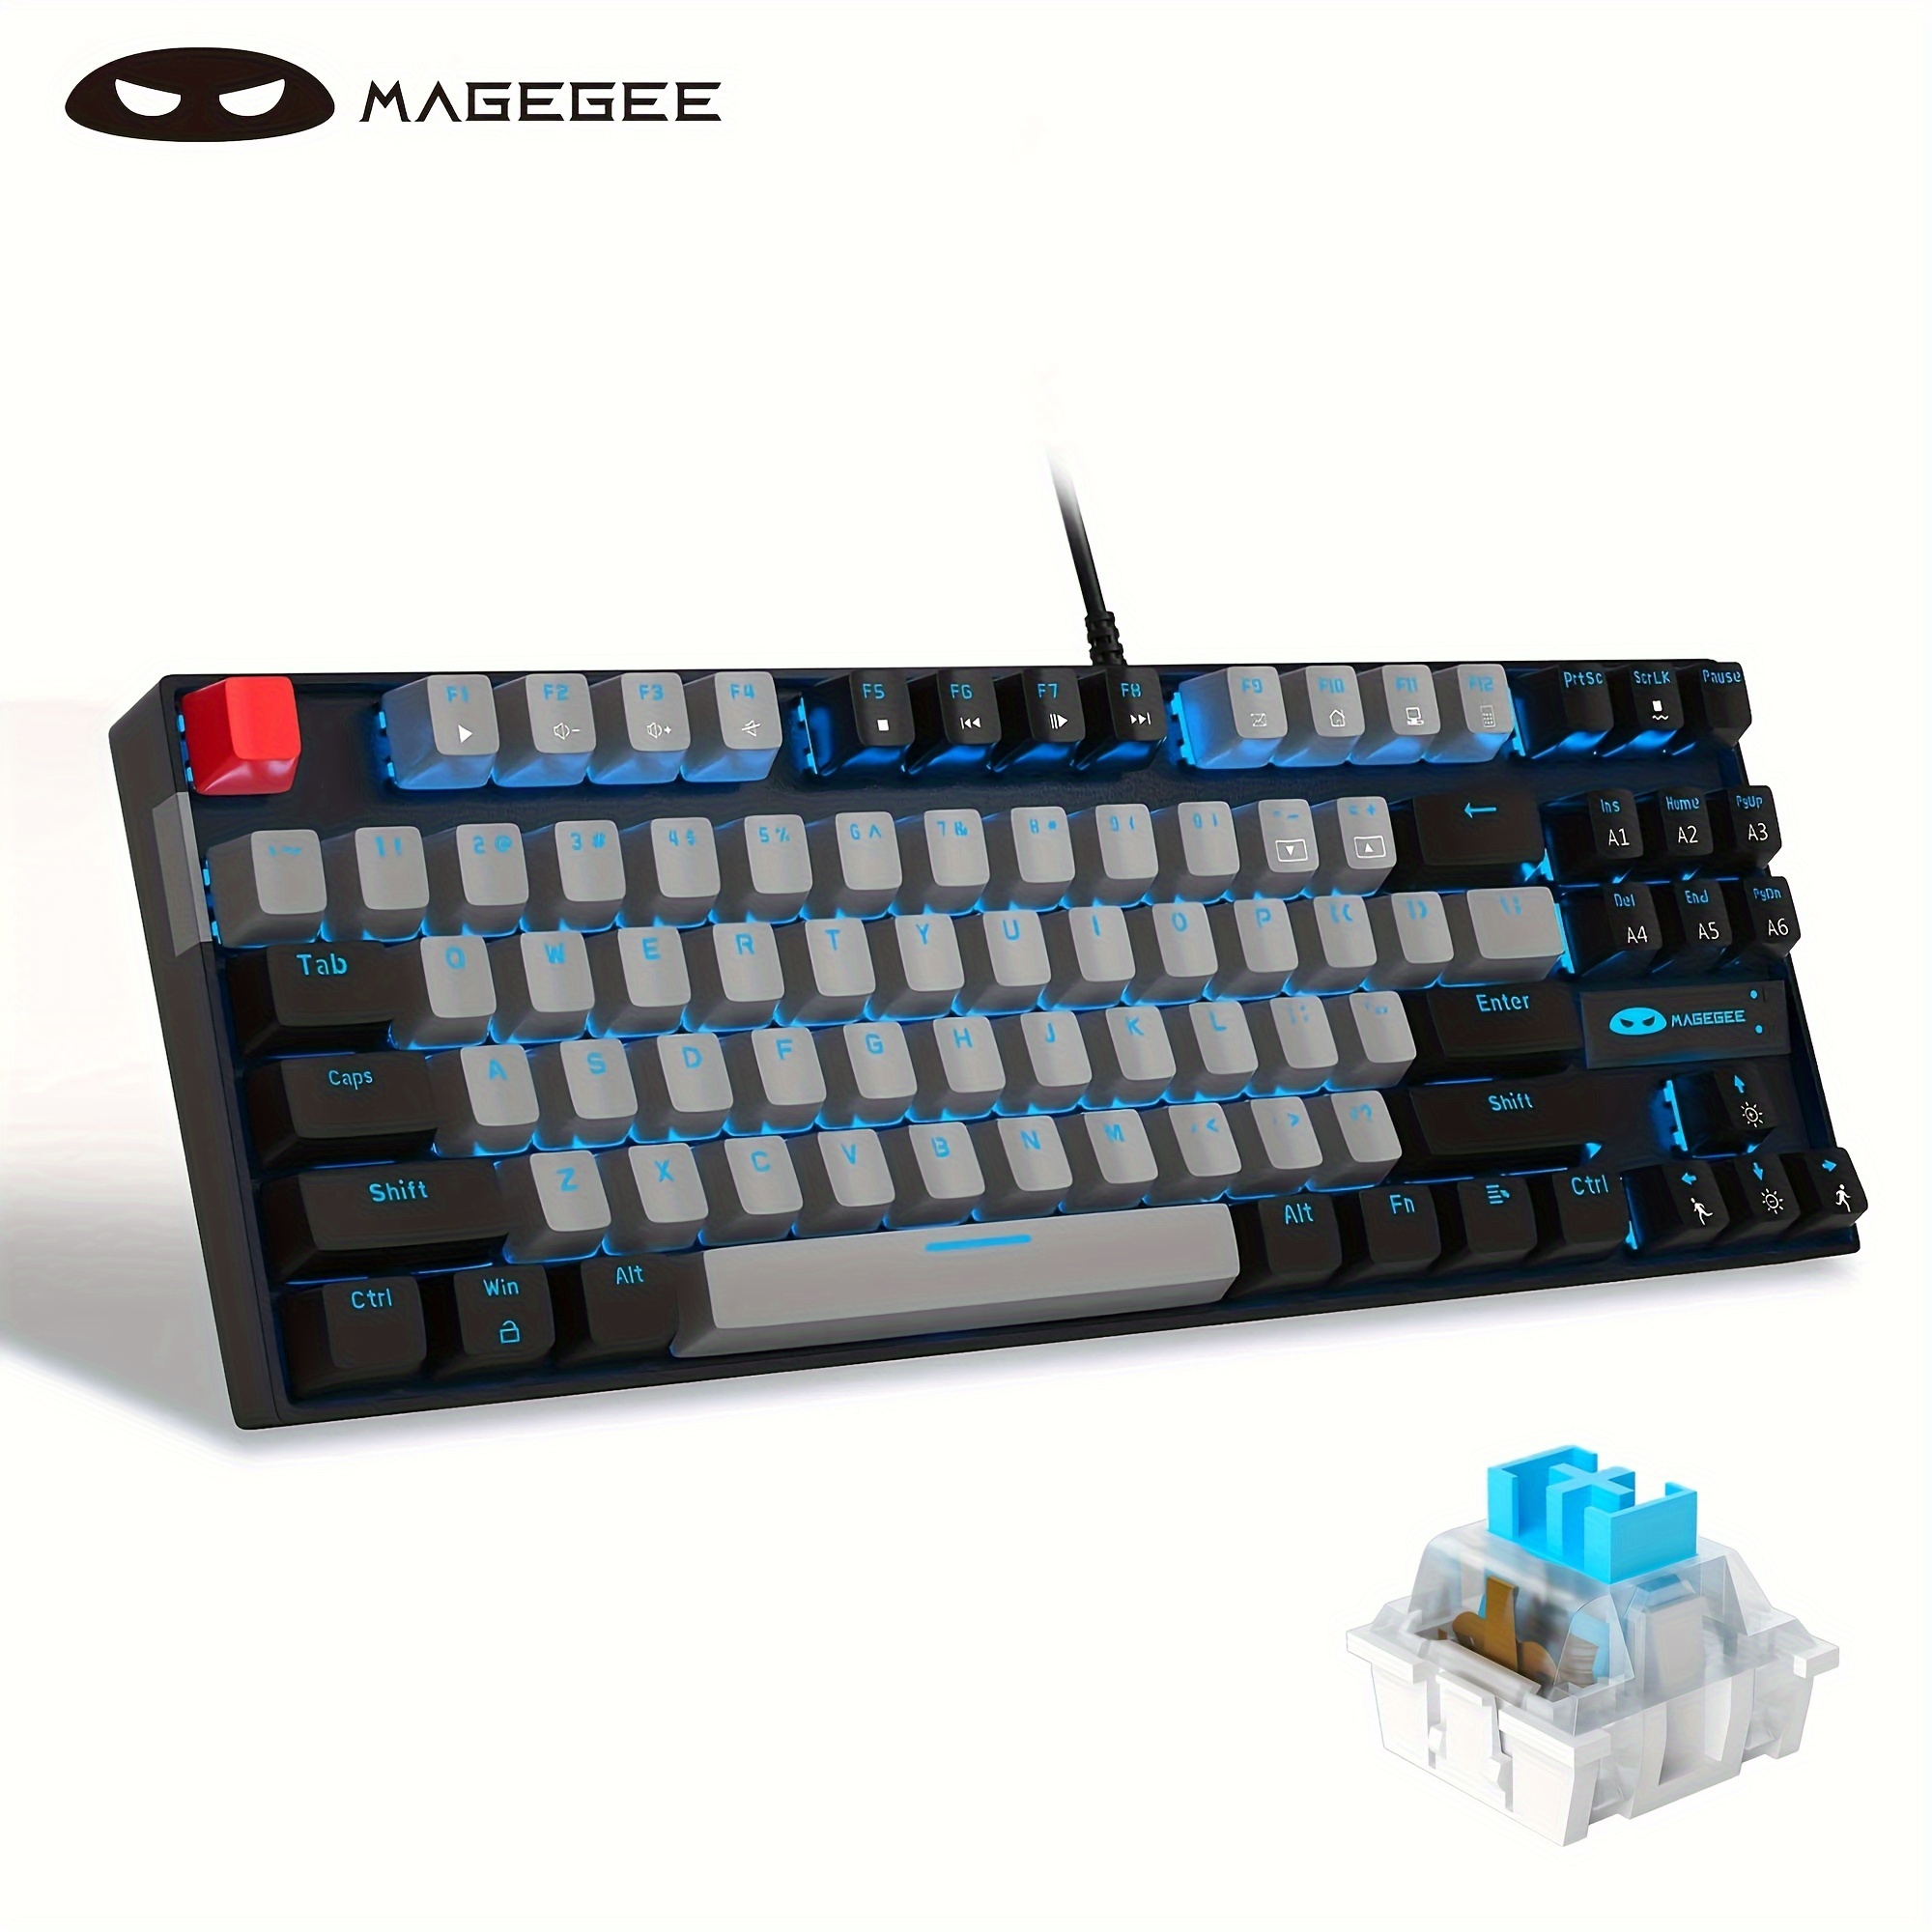 

75% Mechanical Gaming Keyboard With Blue Switch, Led Blue Backlit Keyboard, 87 Keys Compact Tkl Wired Computer Keyboard For Windows, Laptop, Pc Gamer